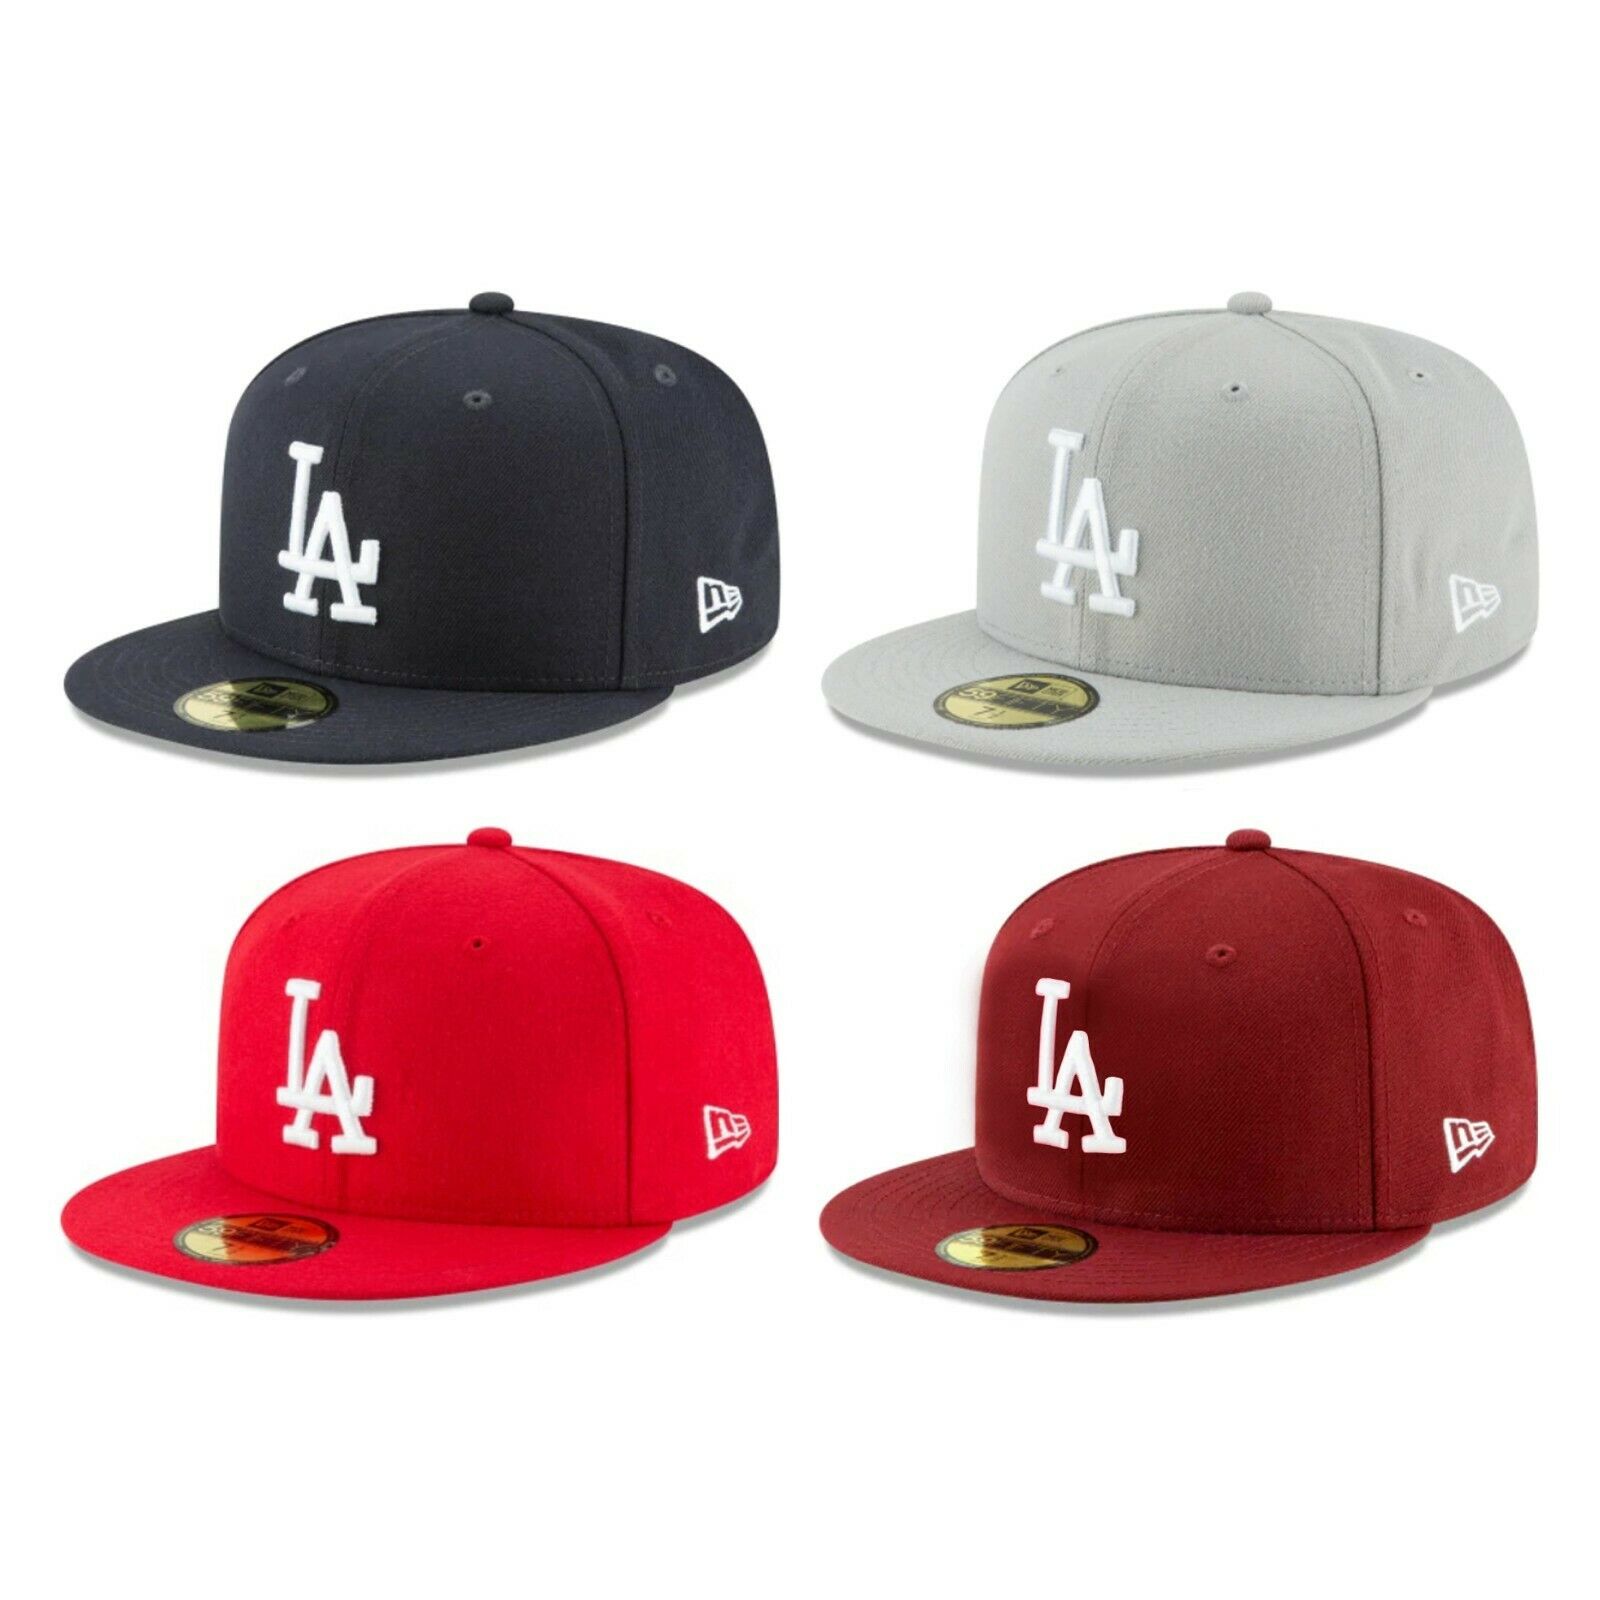 Los Angeles Dodgers Lad Mlb Authentic New Era Fitted Cap -navy Gray Red Burgundy